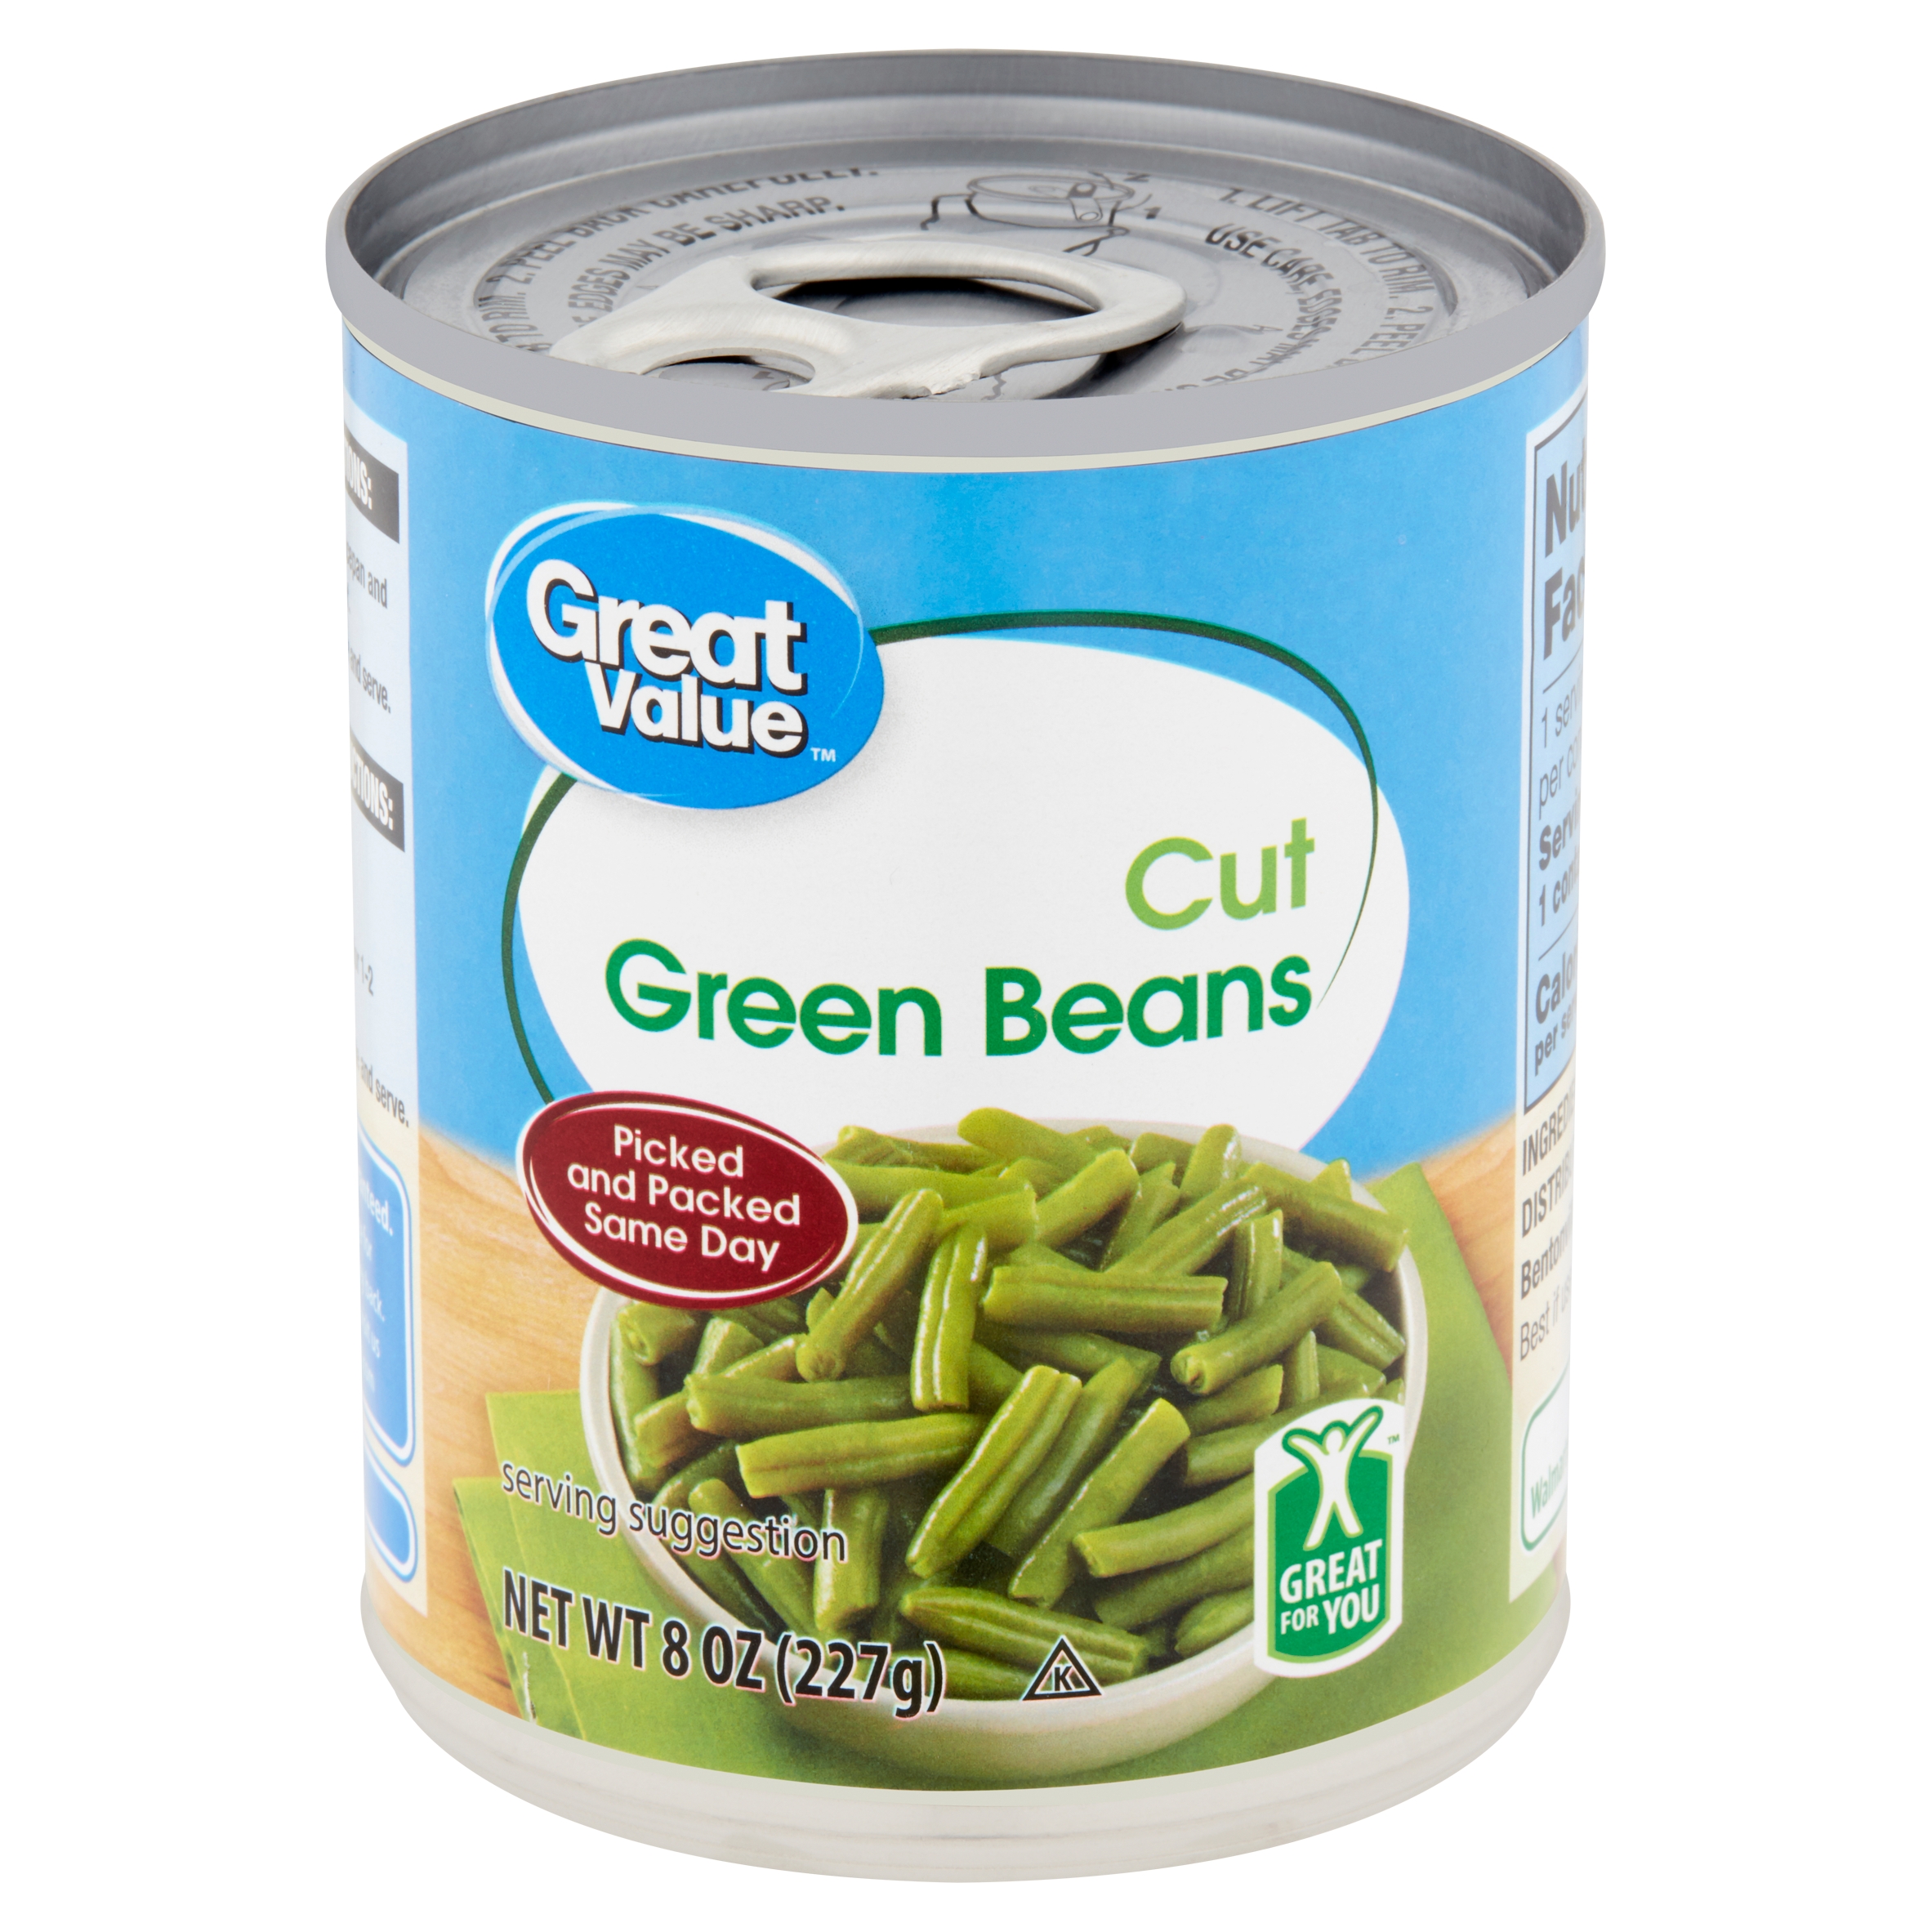 Great Value Cut Green Beans, 8 Oz Image